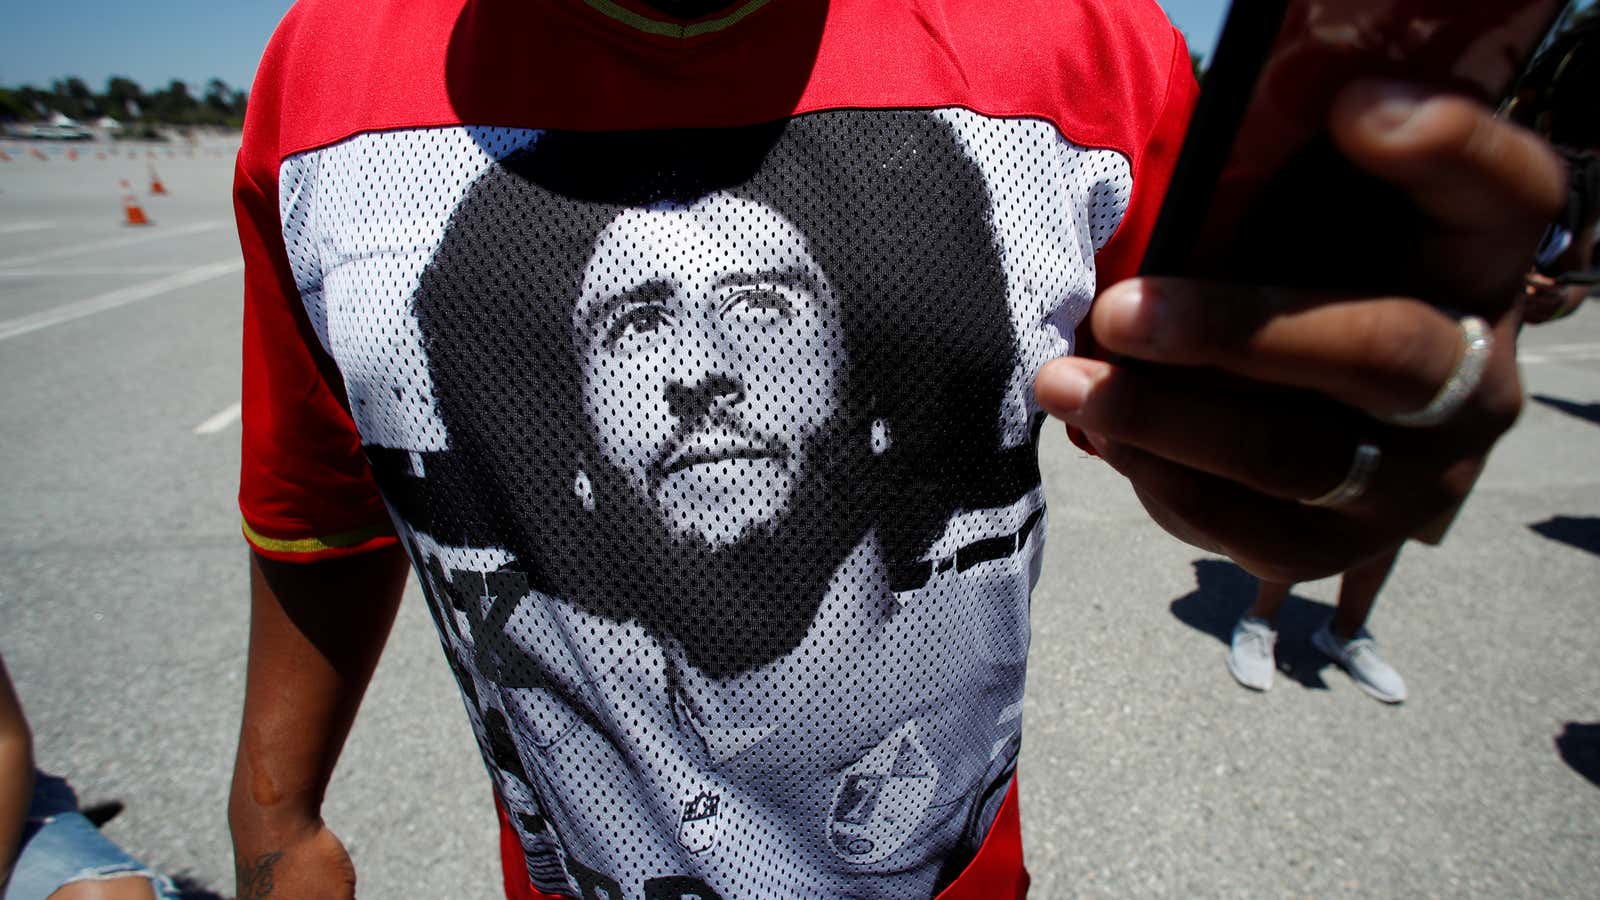 A protester wears a t-shirt with a picture of Colin Kaepernick during a protest against police brutality and racial inequality in the aftermath of theâ€¦